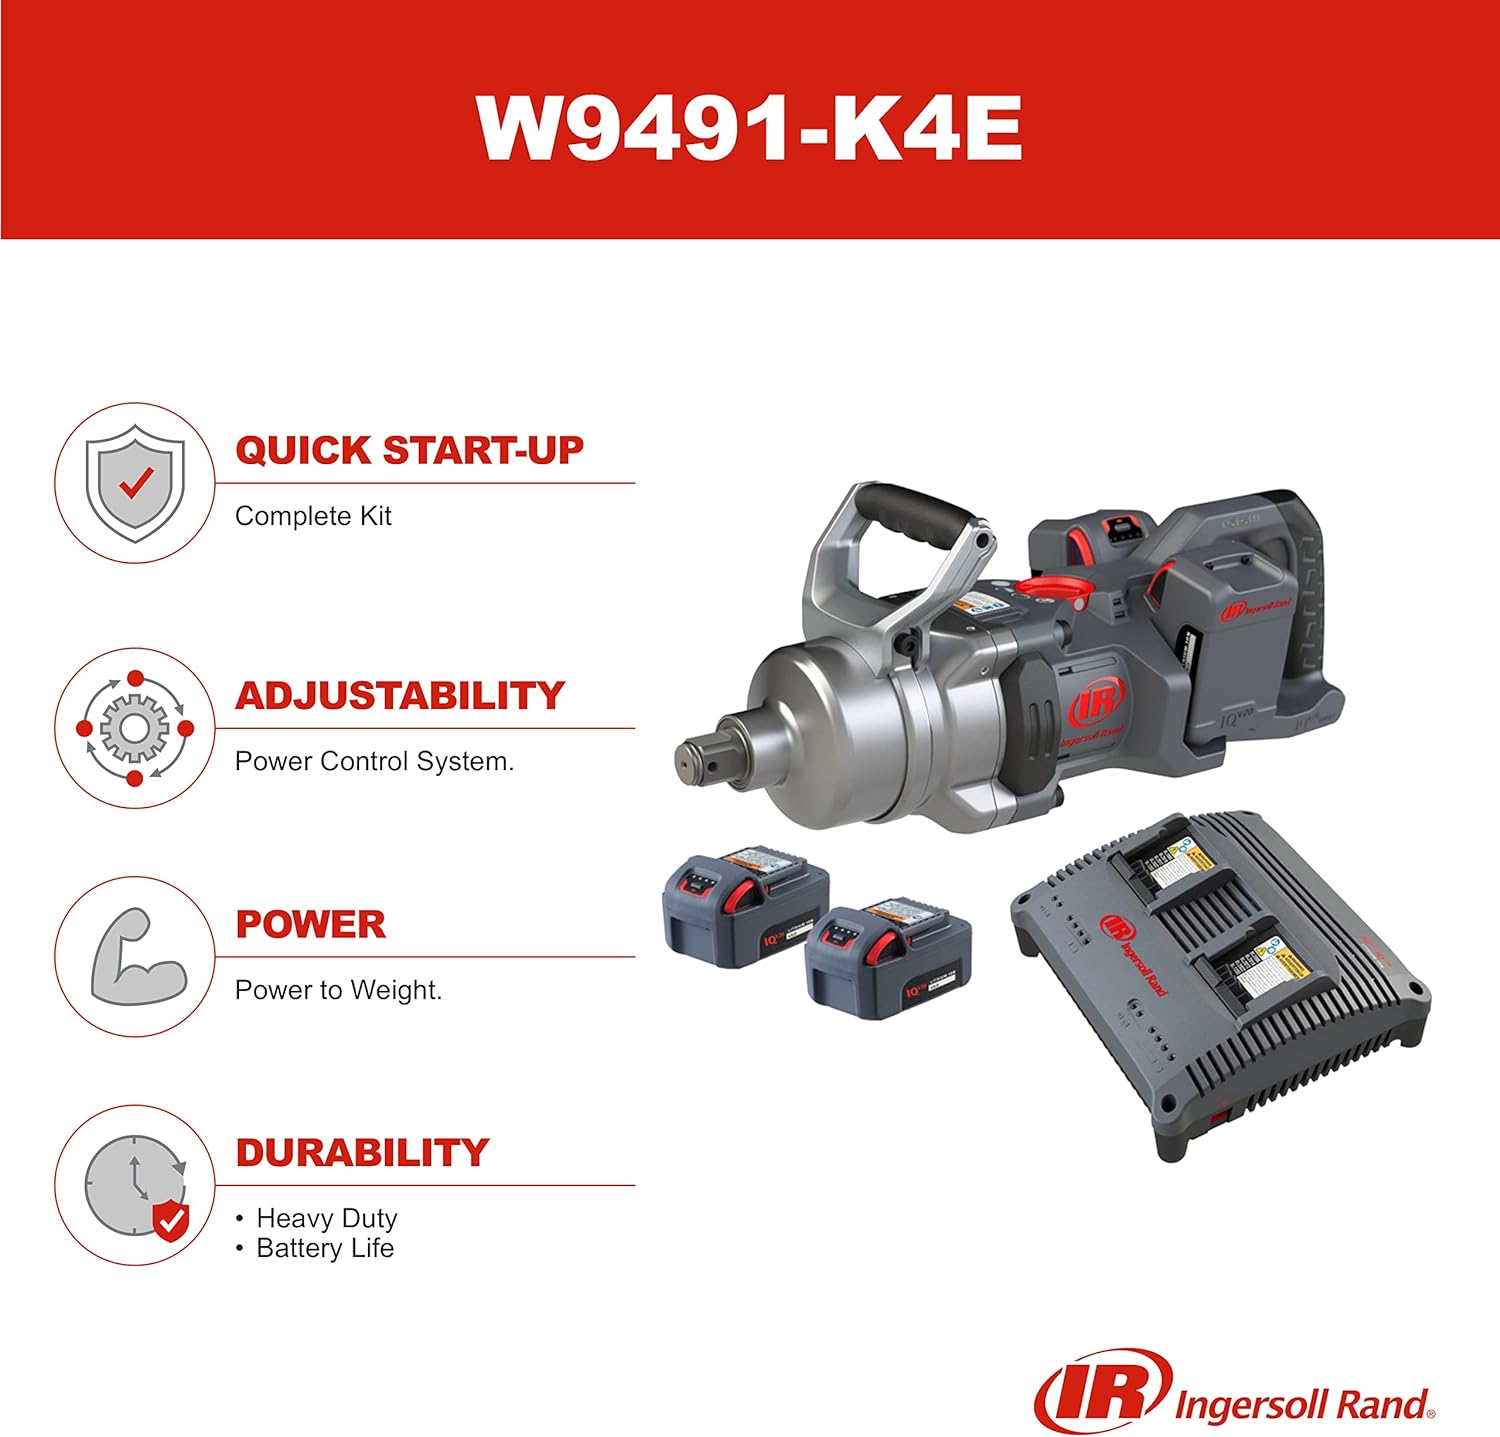 Ingersoll Rand Power Tools Model W9691-K4E - 20V High-Torque 1 Drive Cordless Impact Wrench Kit, 3000 Ft-Lbs Nut-Busting Torque, 4 Batteries And Charger, 6 Extended Anvil